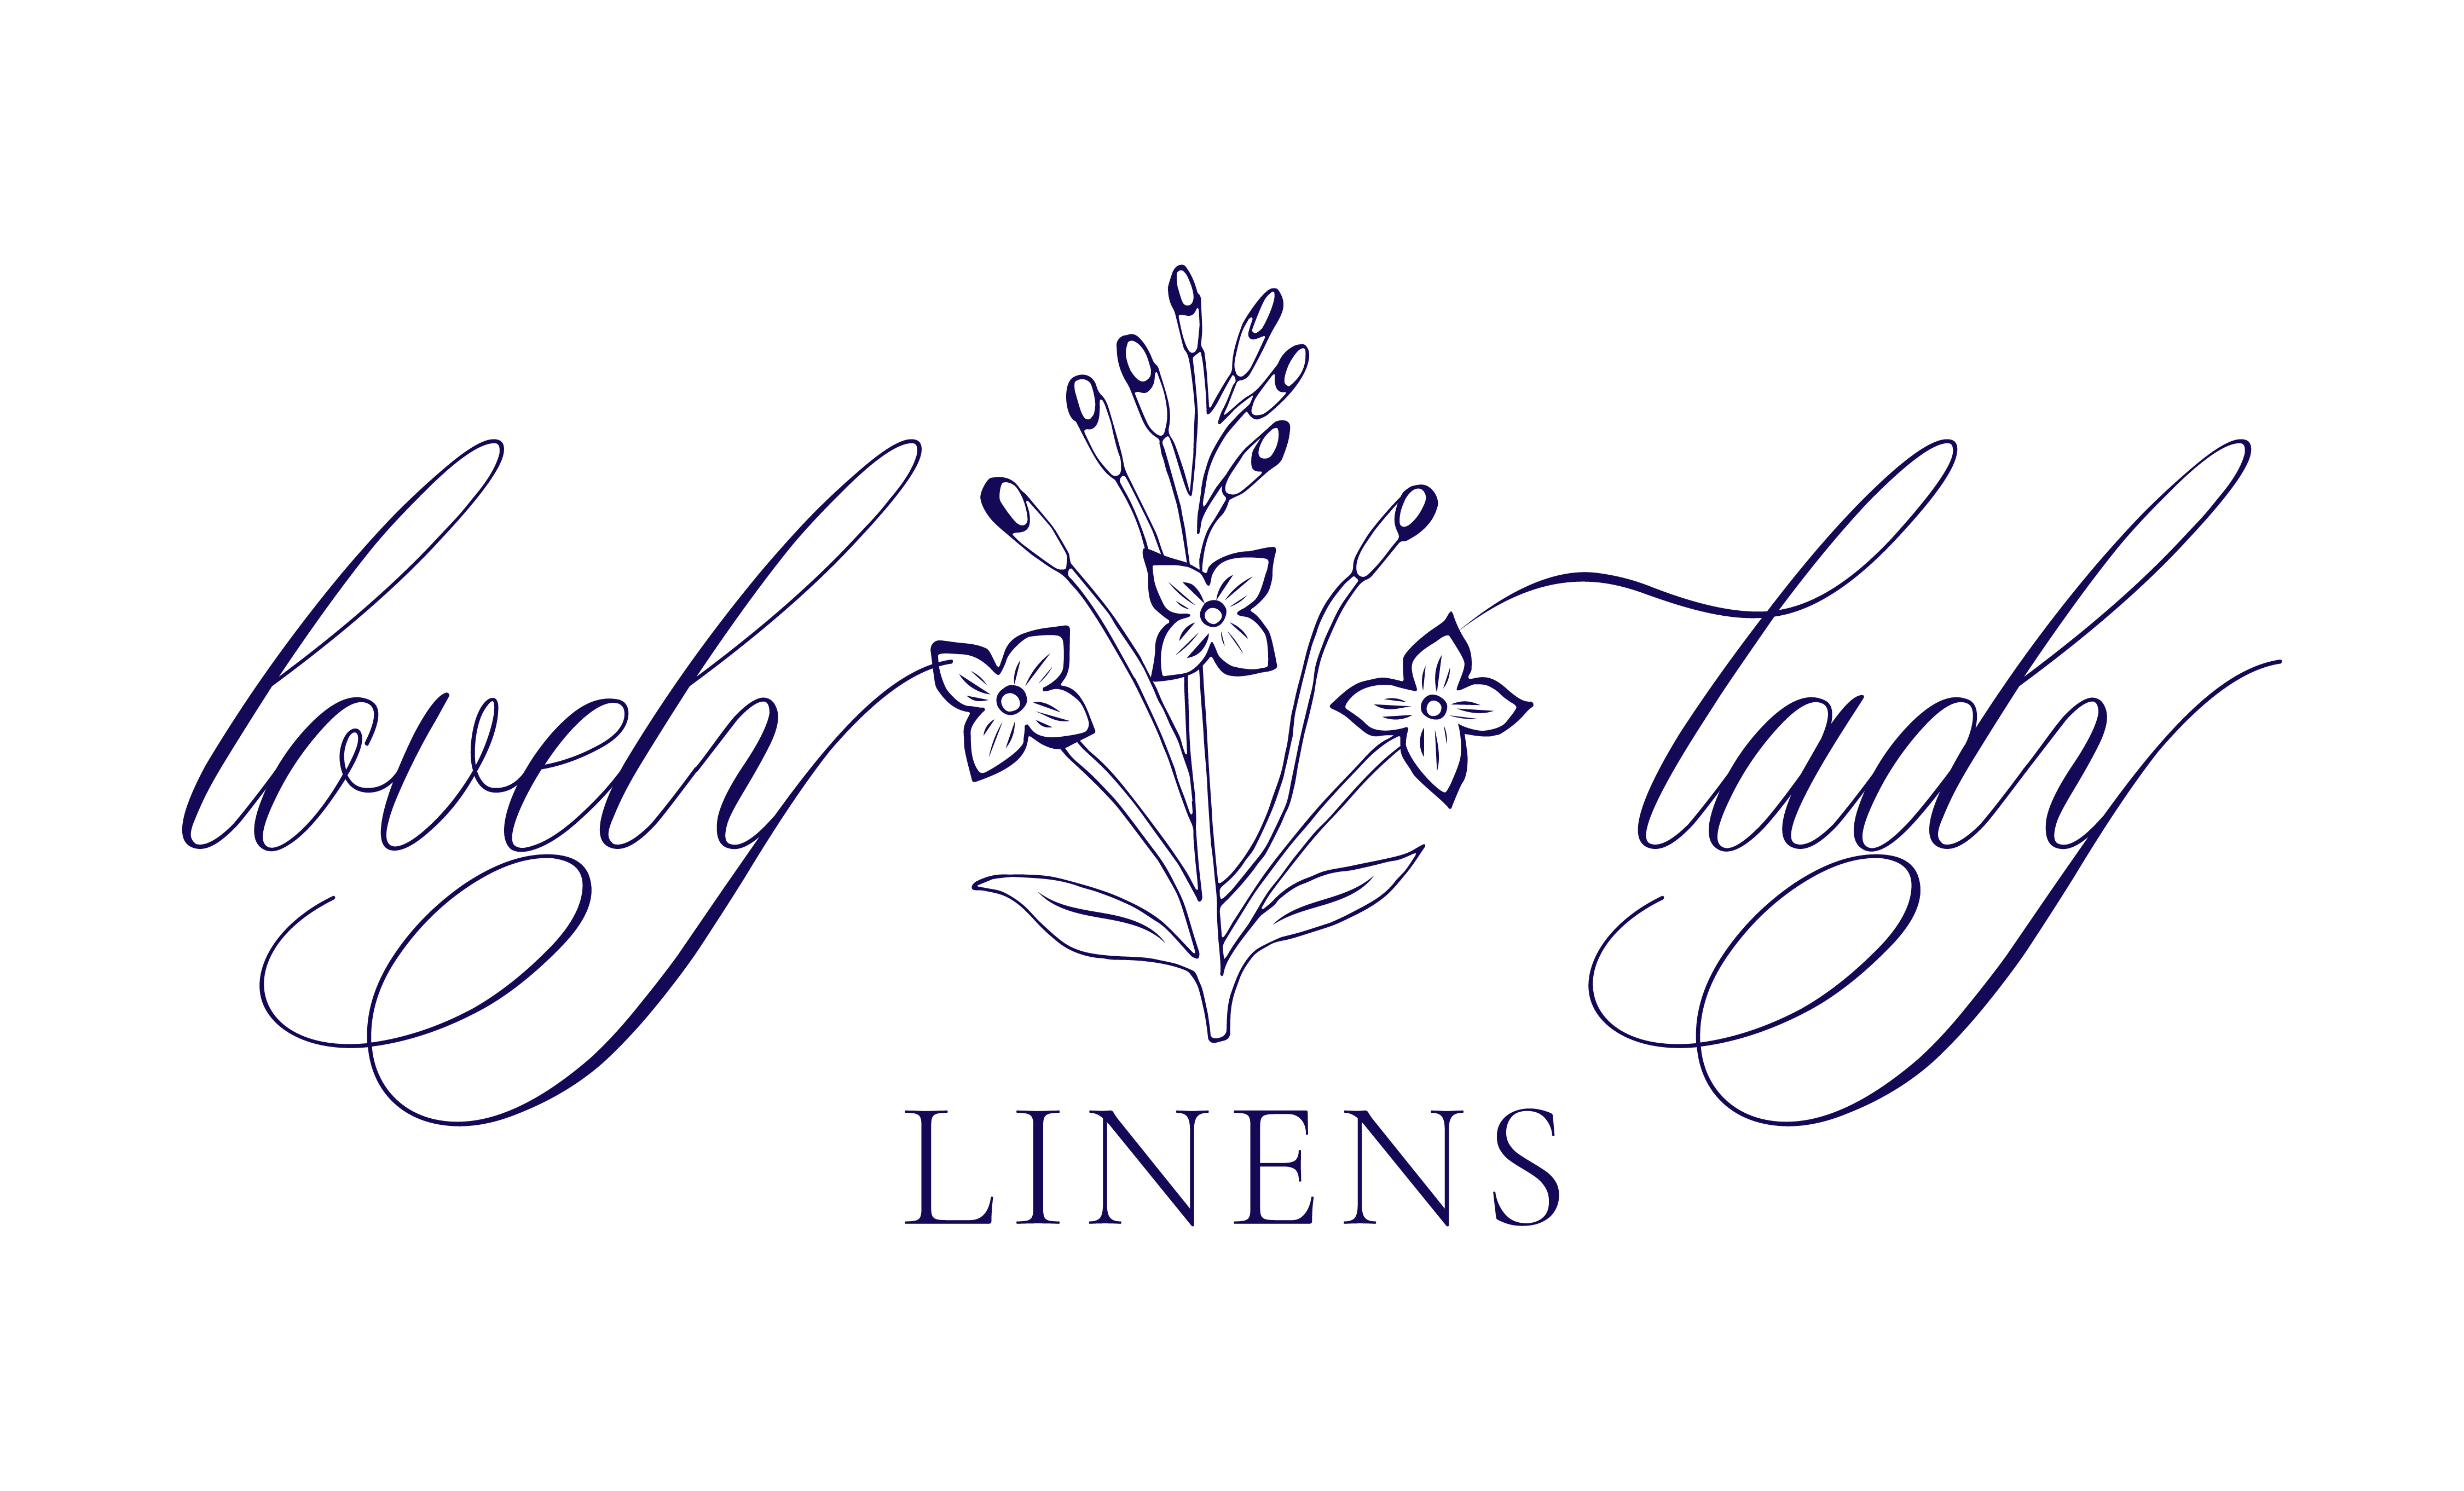 Lovely Lady Linens